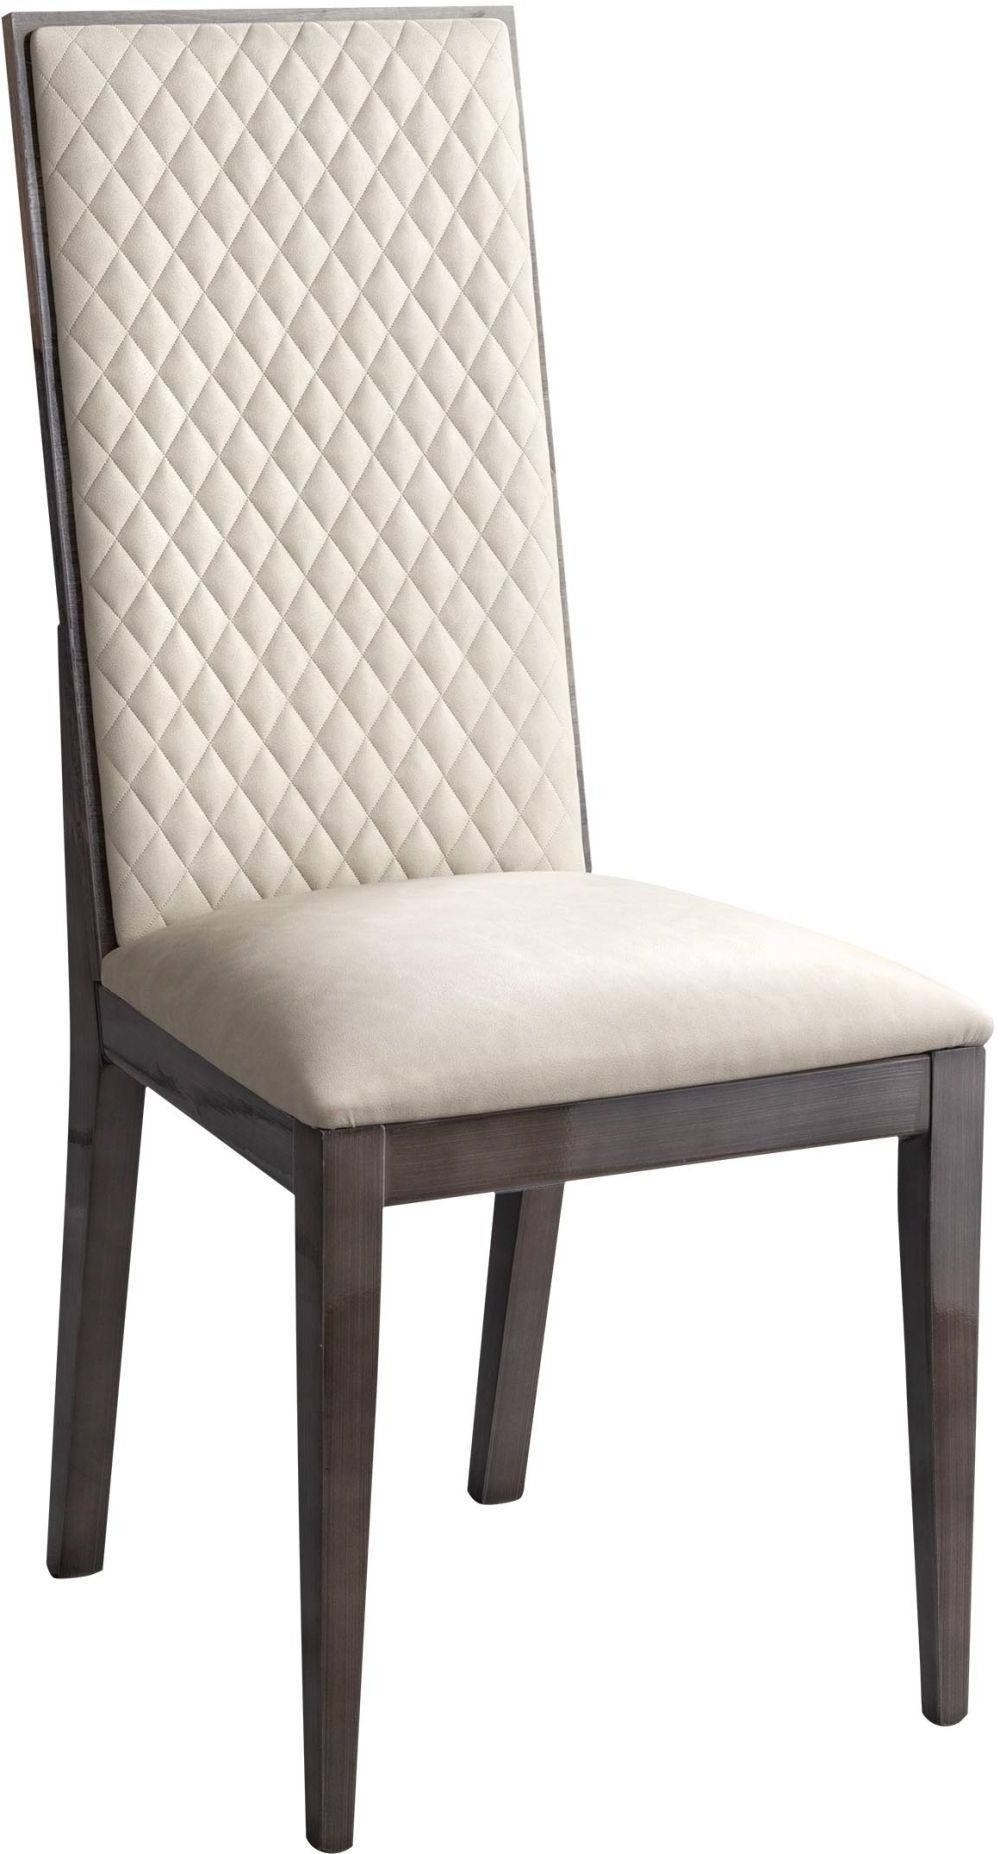 Status Medea Day Vintage Oak Silk Grey Faux Leather Luxury Dining Chair Sold In Pairs